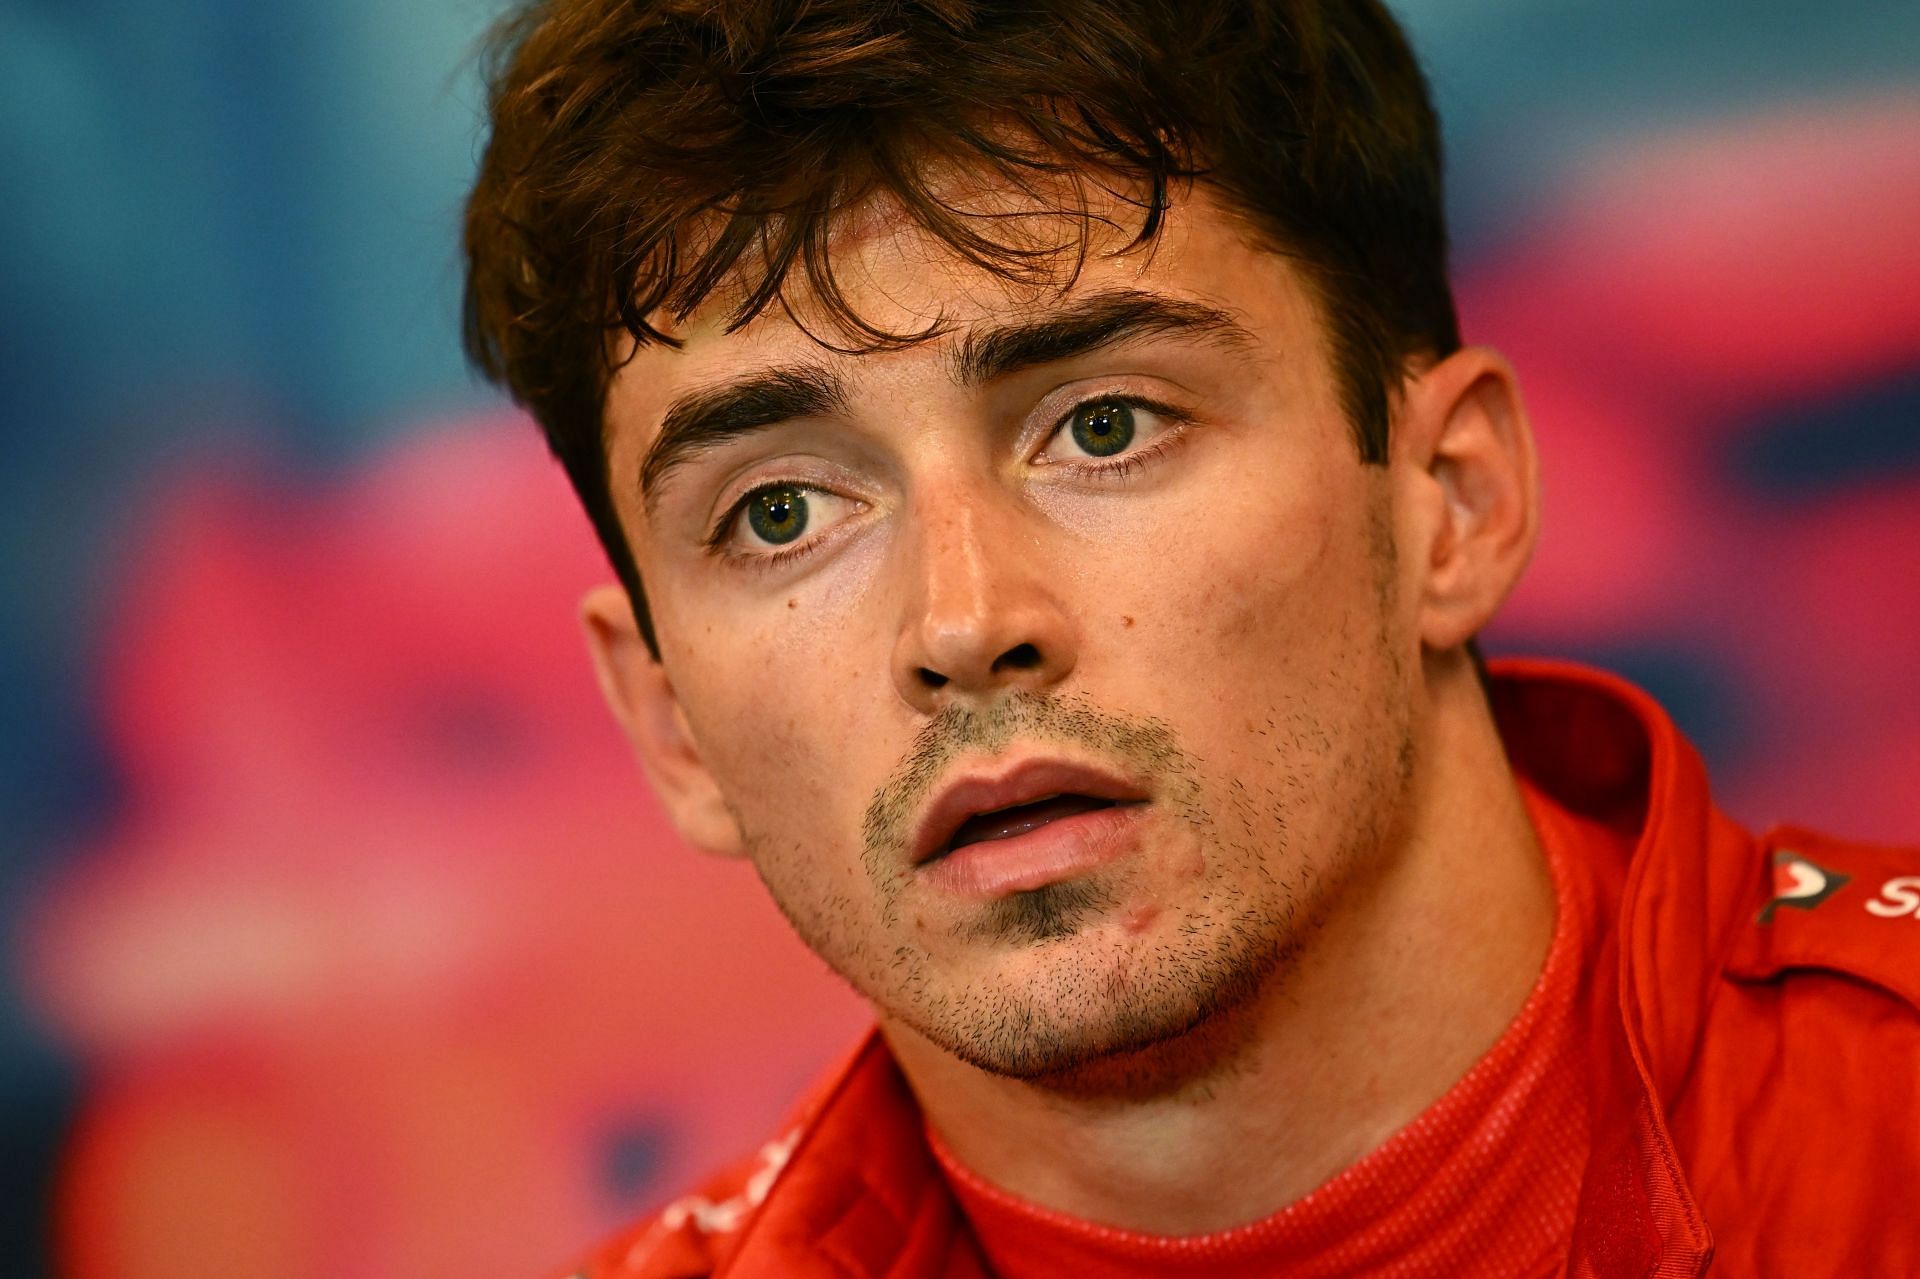 Charles Leclerc failed to capitalize on his sensational pole position at the 2022 Monaco GP